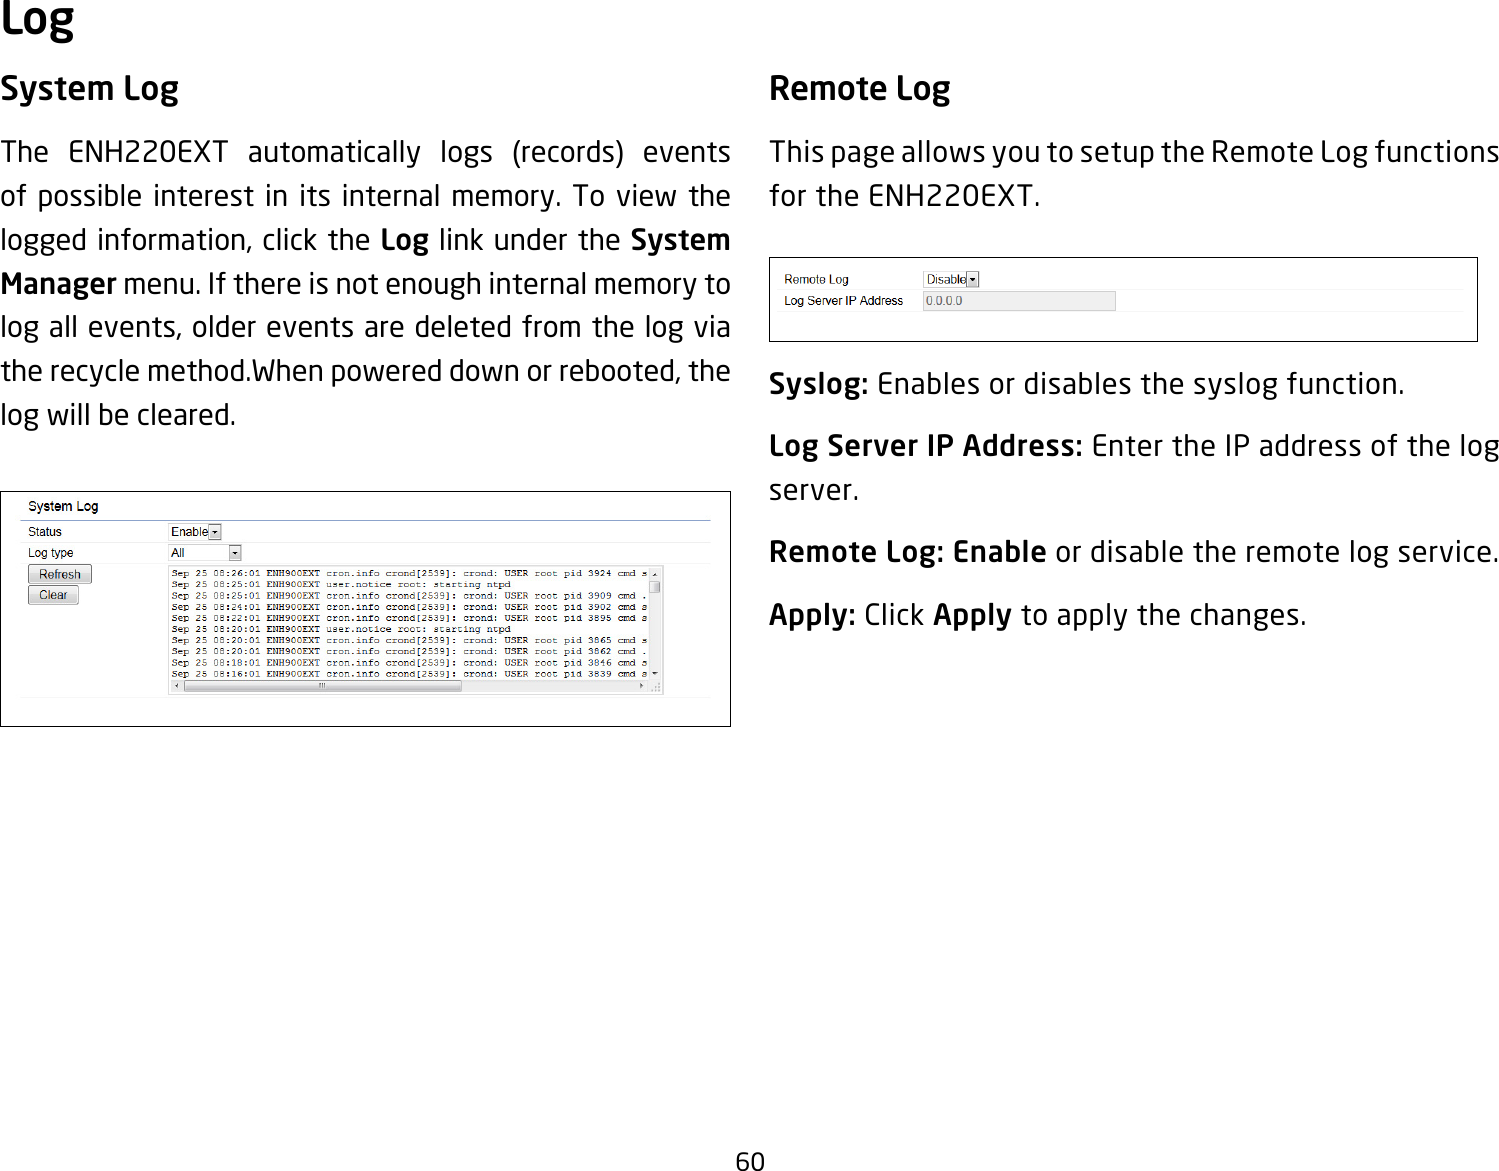 60System LogThe ENH220EXT automatically logs (records) eventsof possible interest in its internal memory. To view the logged information, click the Log link under the System Manager menu. If there is not enough internal memory to log all events, older events are deleted from the log via the recycle method.When powered down or rebooted, the log will be cleared.Remote LogThis page allows you to setup the Remote Log functions for the ENH220EXT.Syslog: Enables or disables the syslog function.Log Server IP Address: Enter the IP address of the log server.Remote Log: Enable or disable the remote log service.Apply: Click Apply to apply the changes.Log